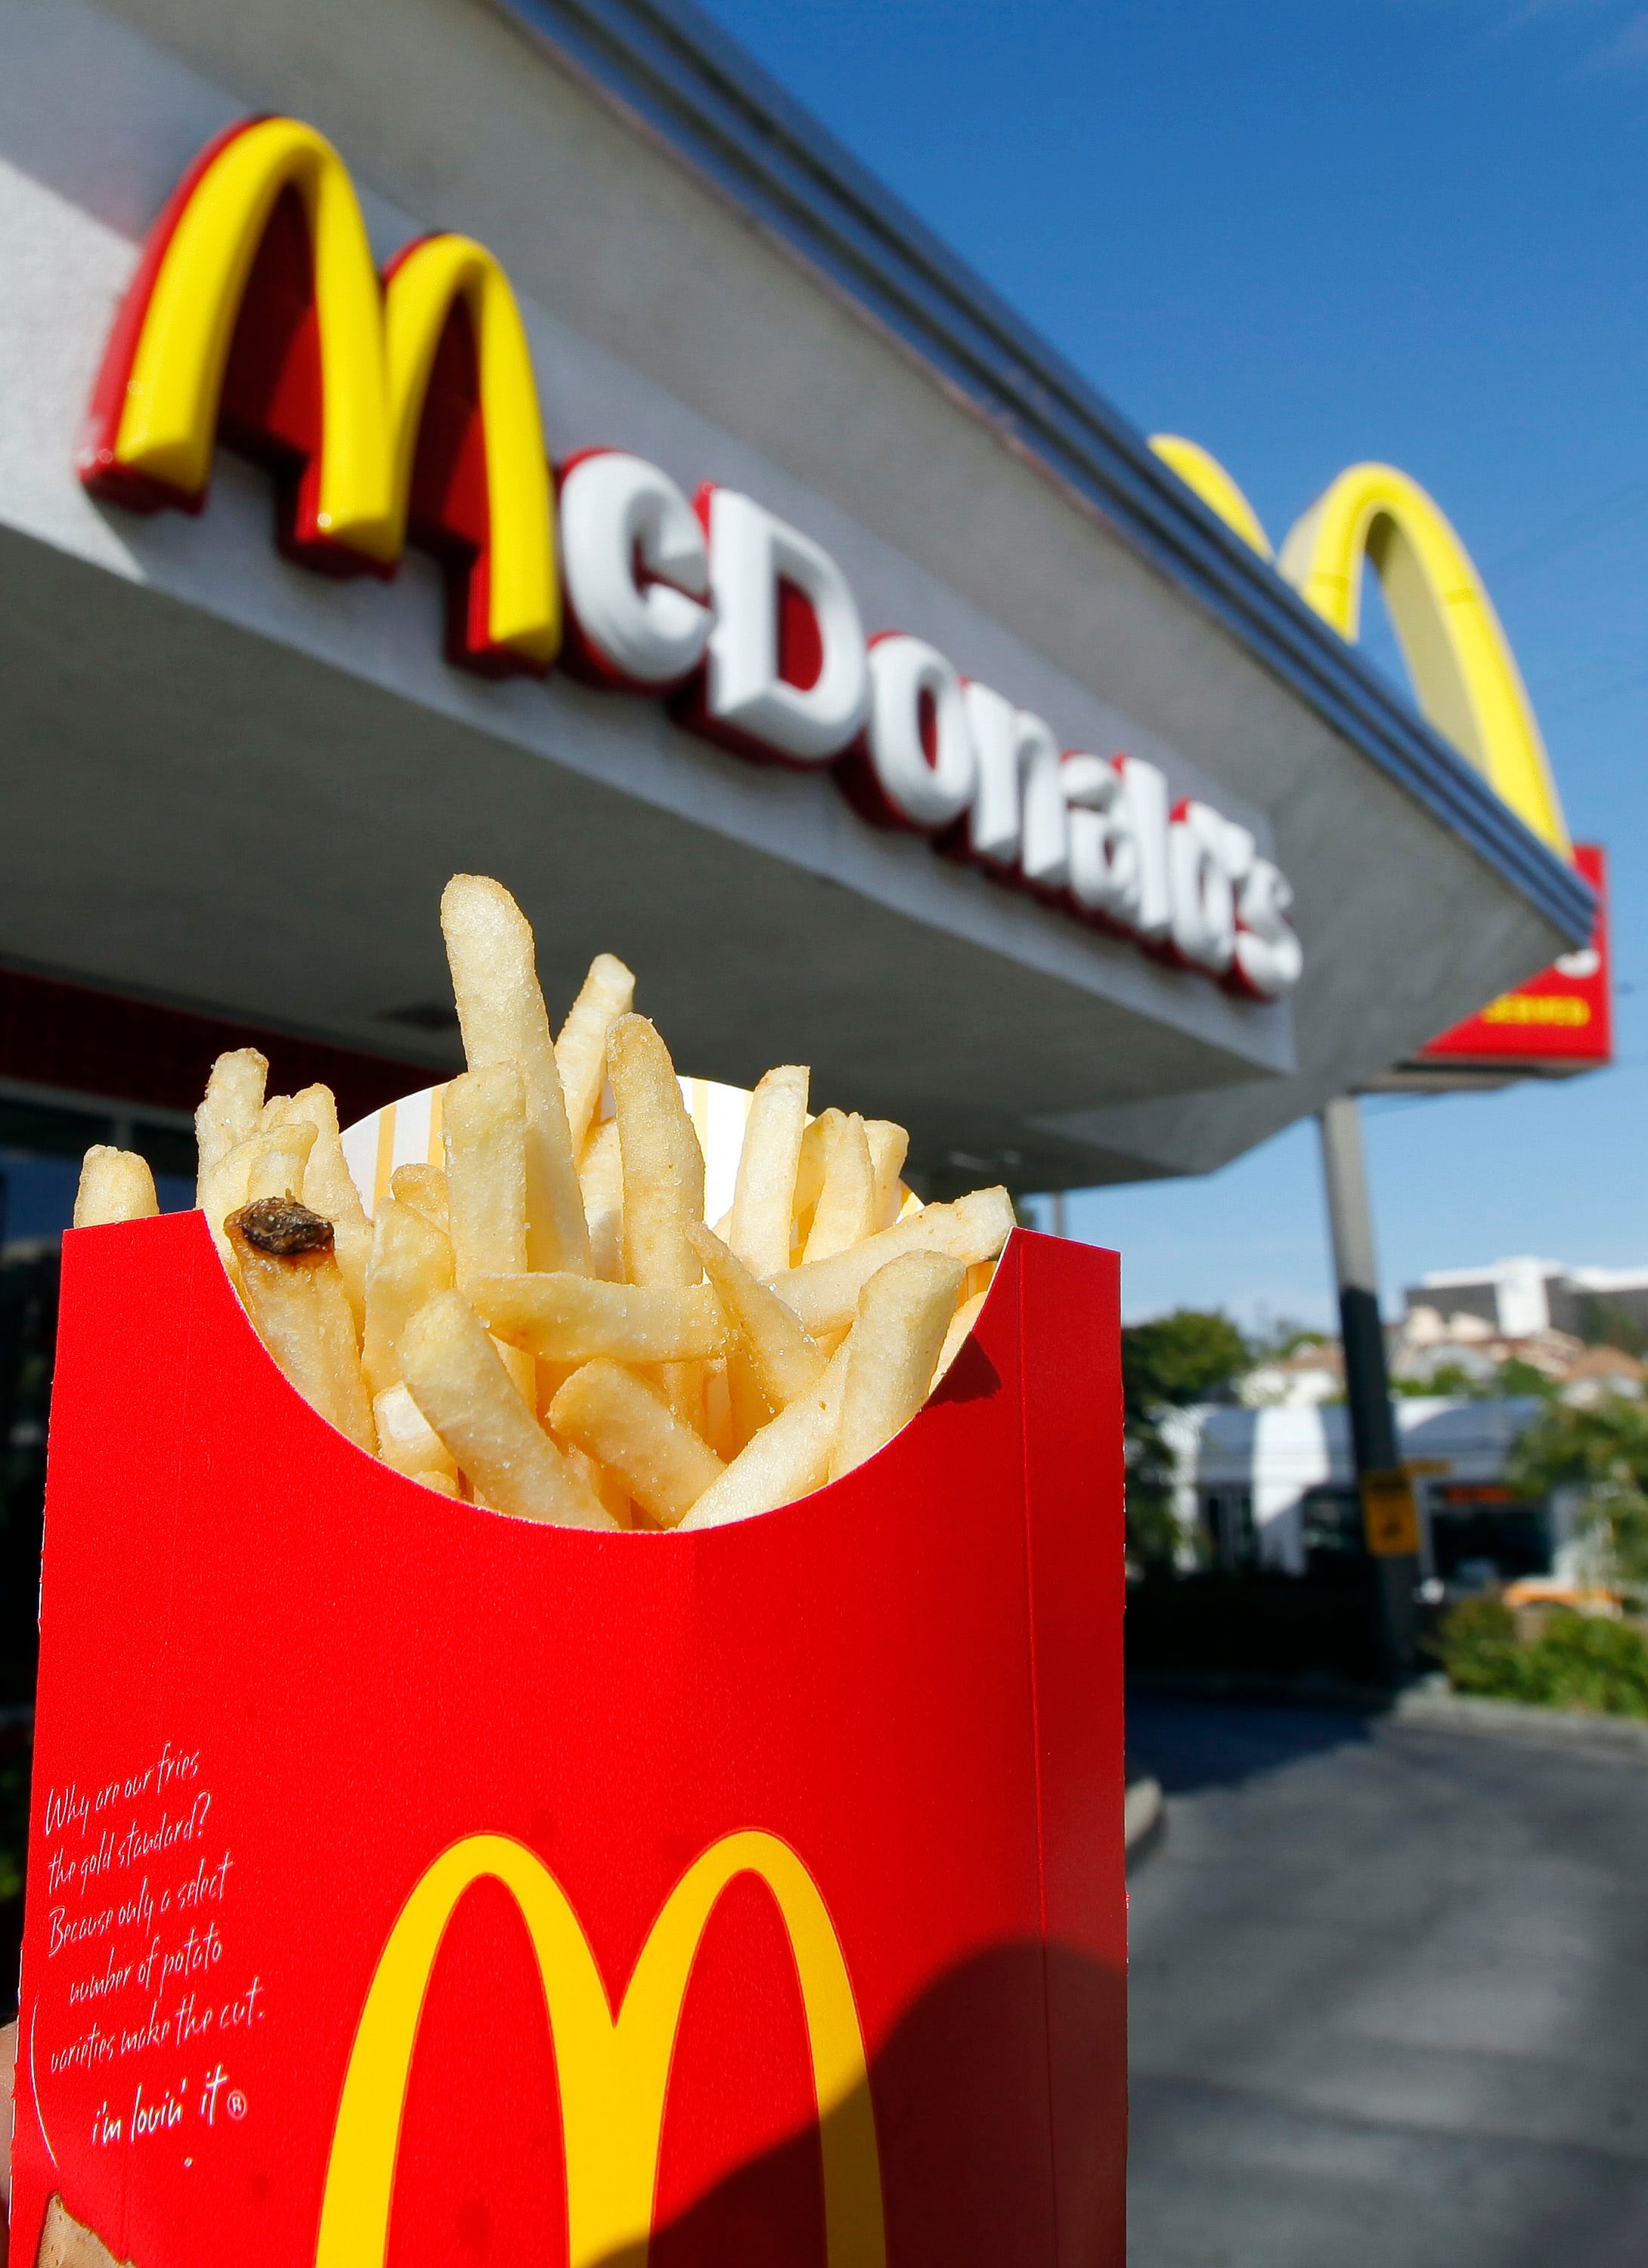 McDonald's is closing more restaurants in Walmart stores, but Taco Bell, Domino's and others are moving in